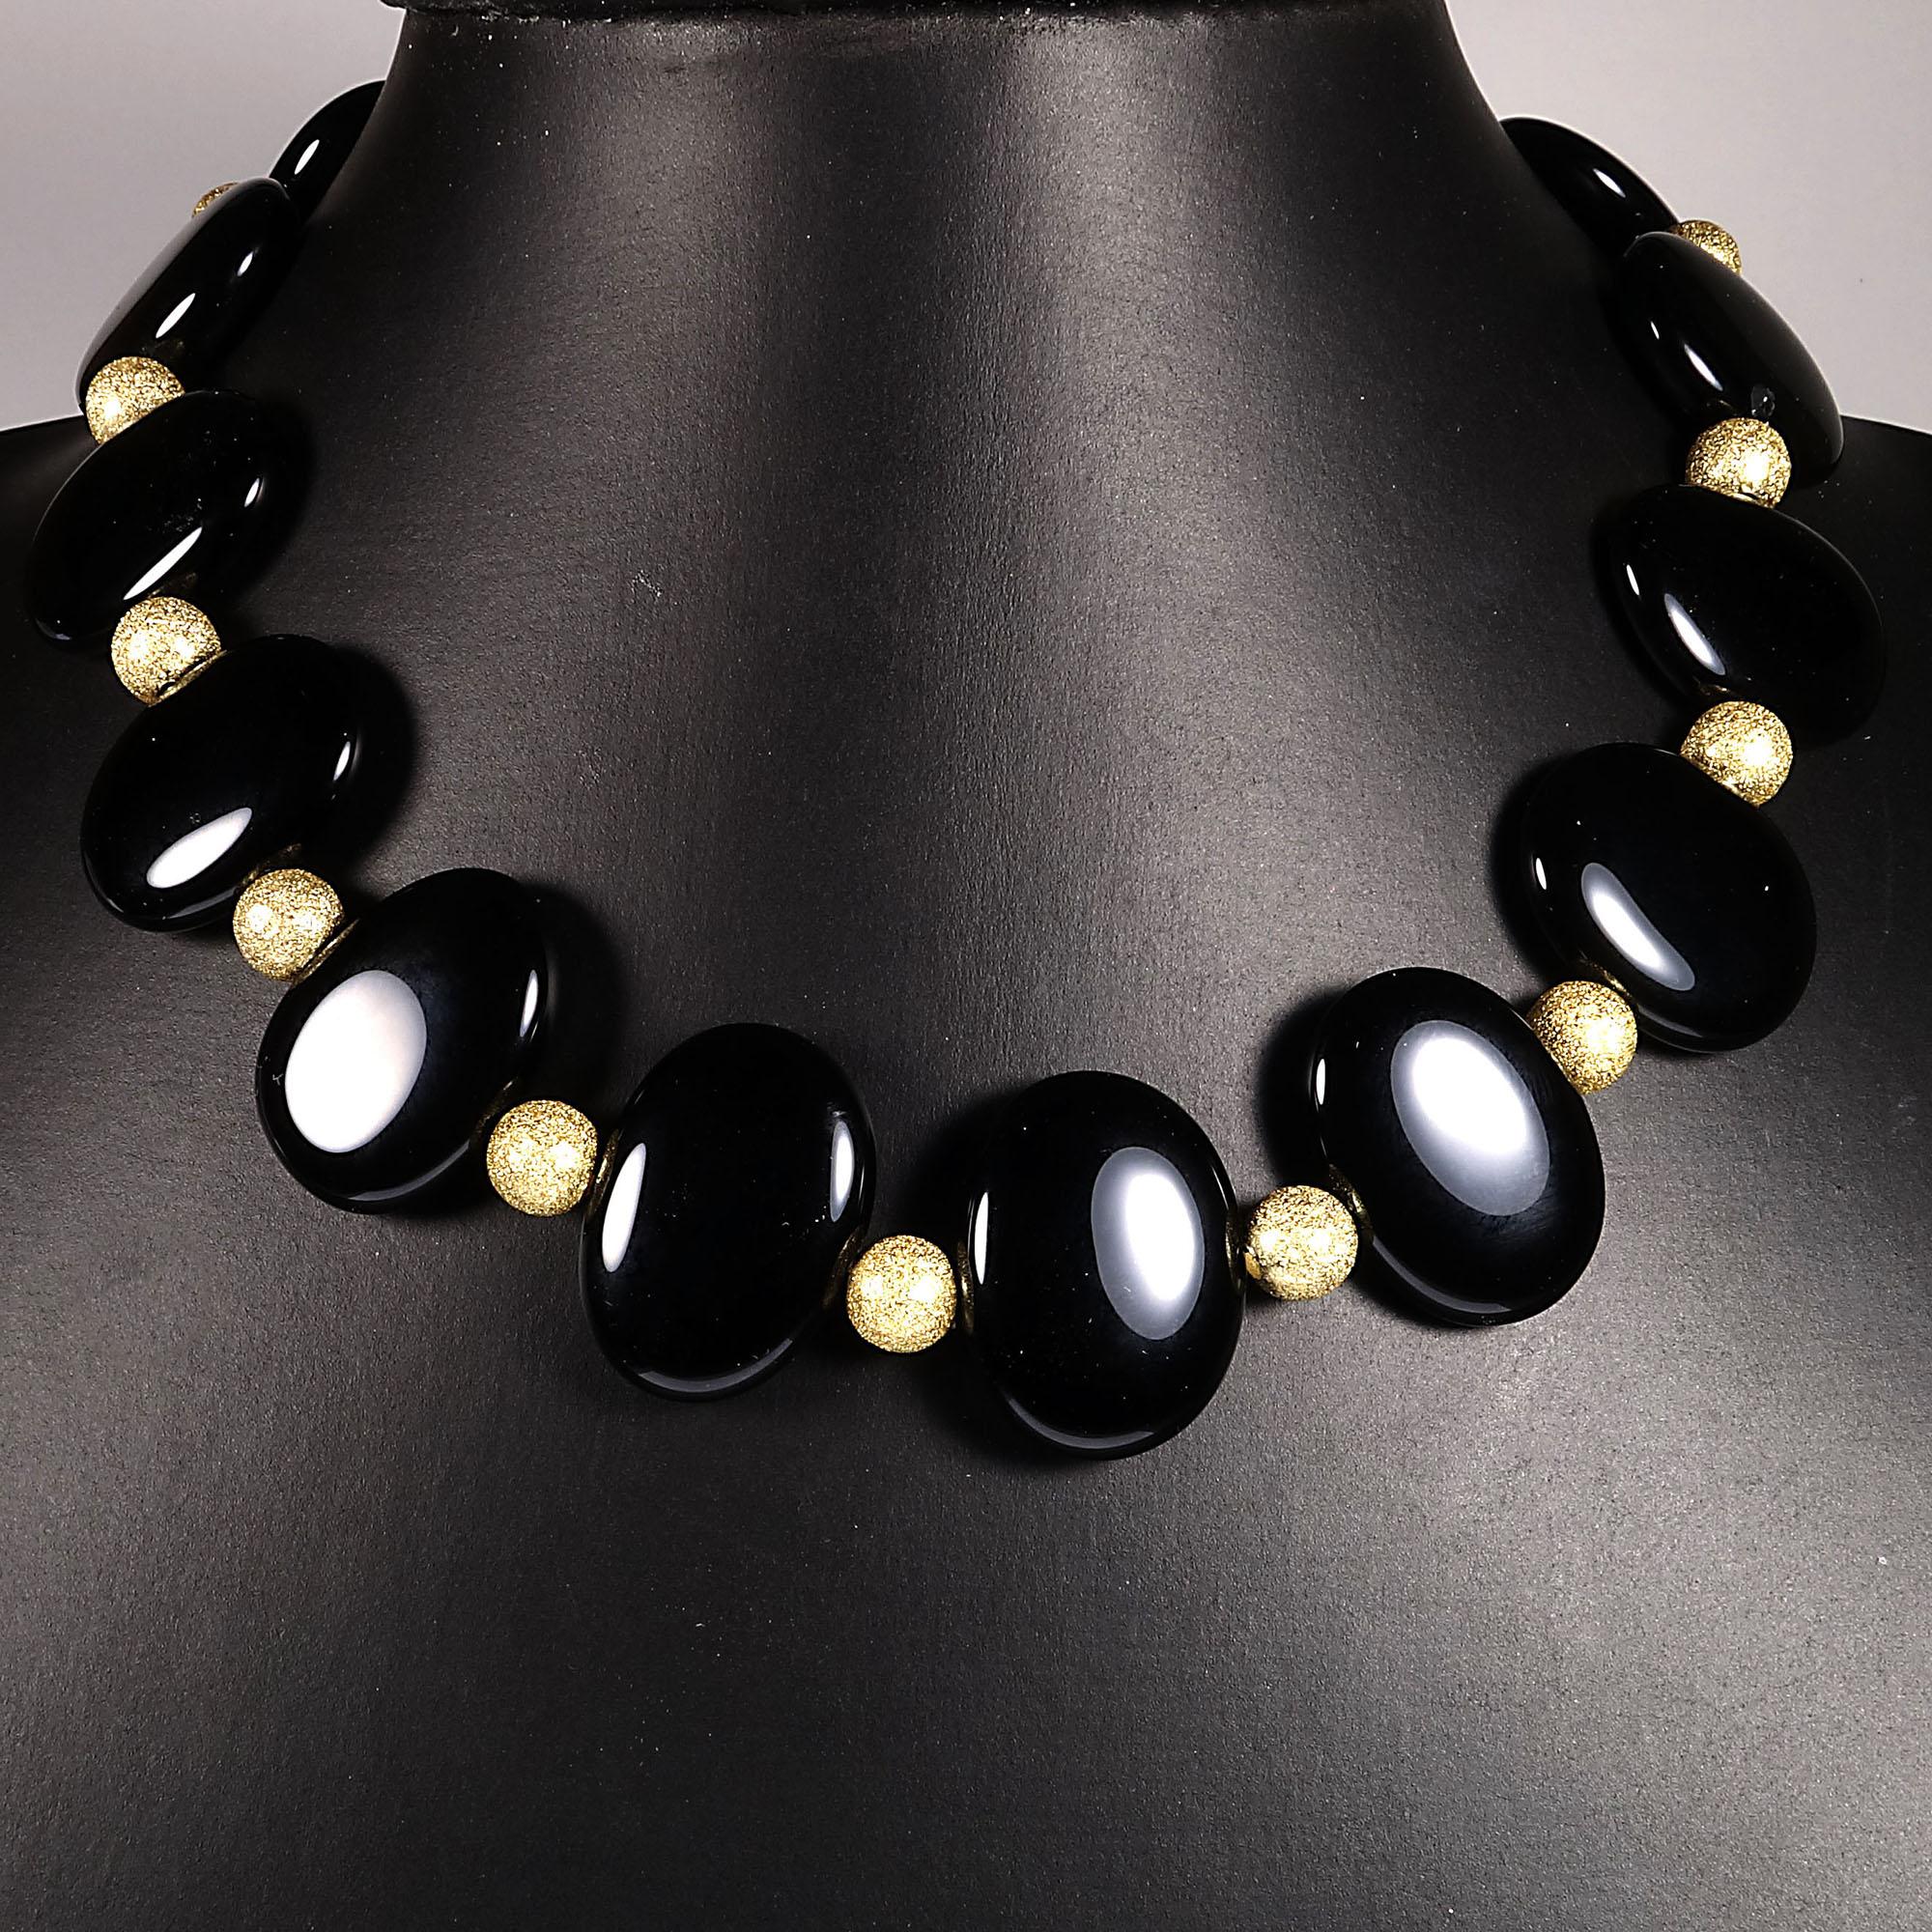 Elegant Choker Necklace of Black Onyx with Gold Accents 2